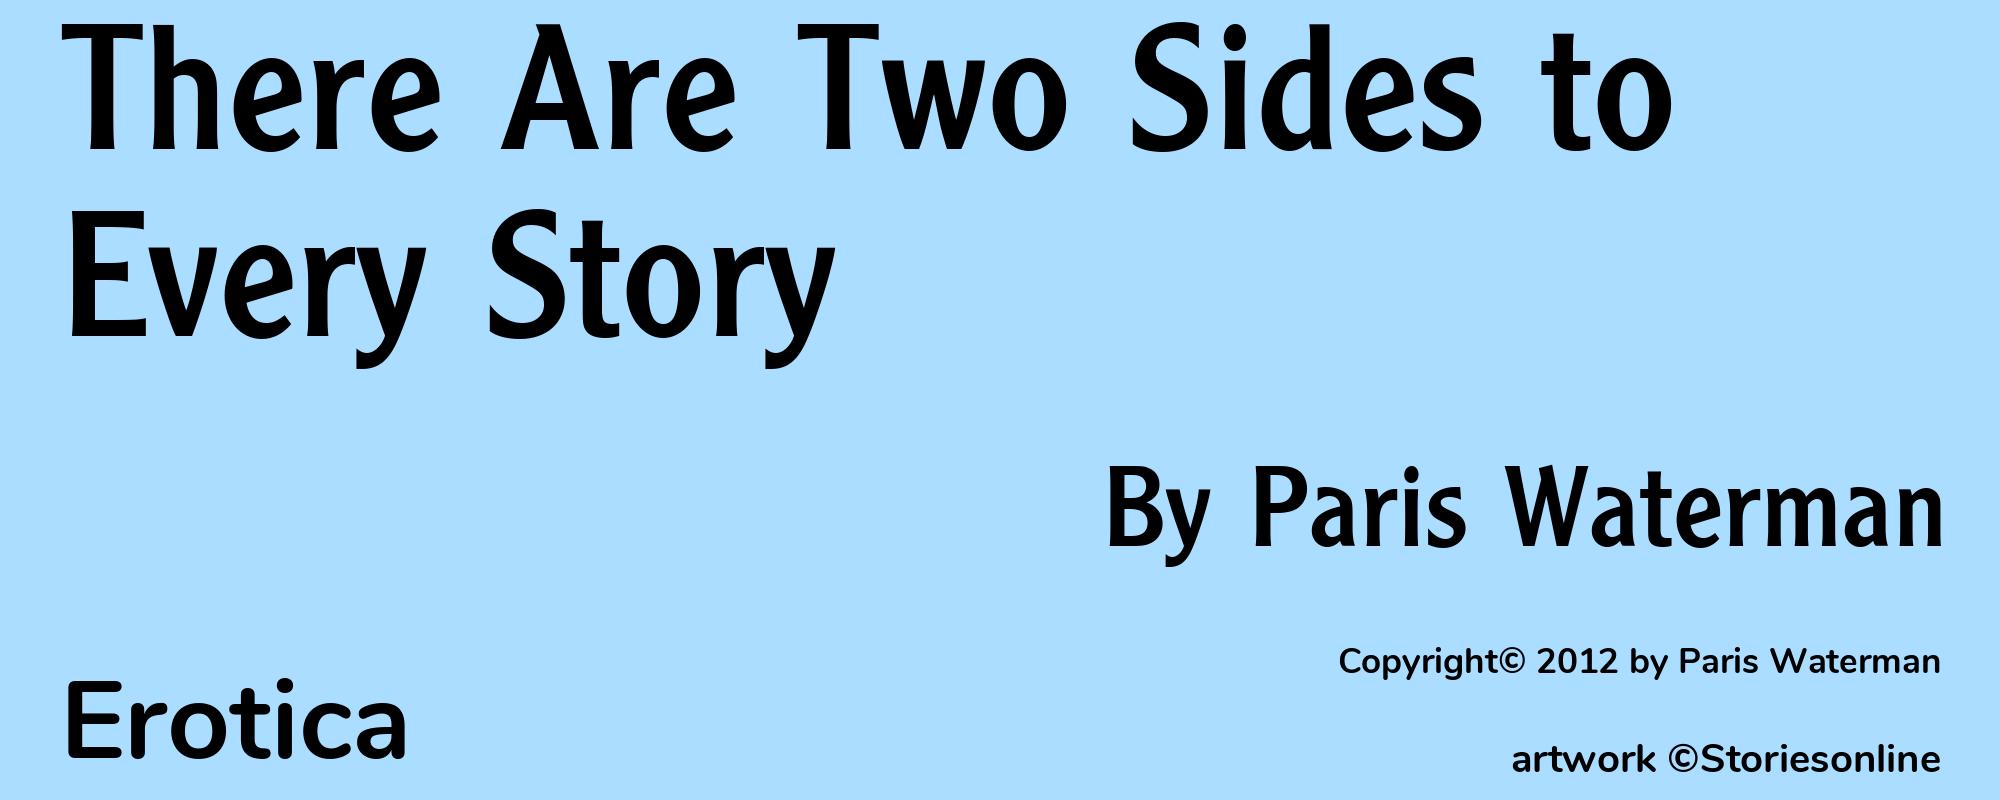 There Are Two Sides to Every Story - Cover